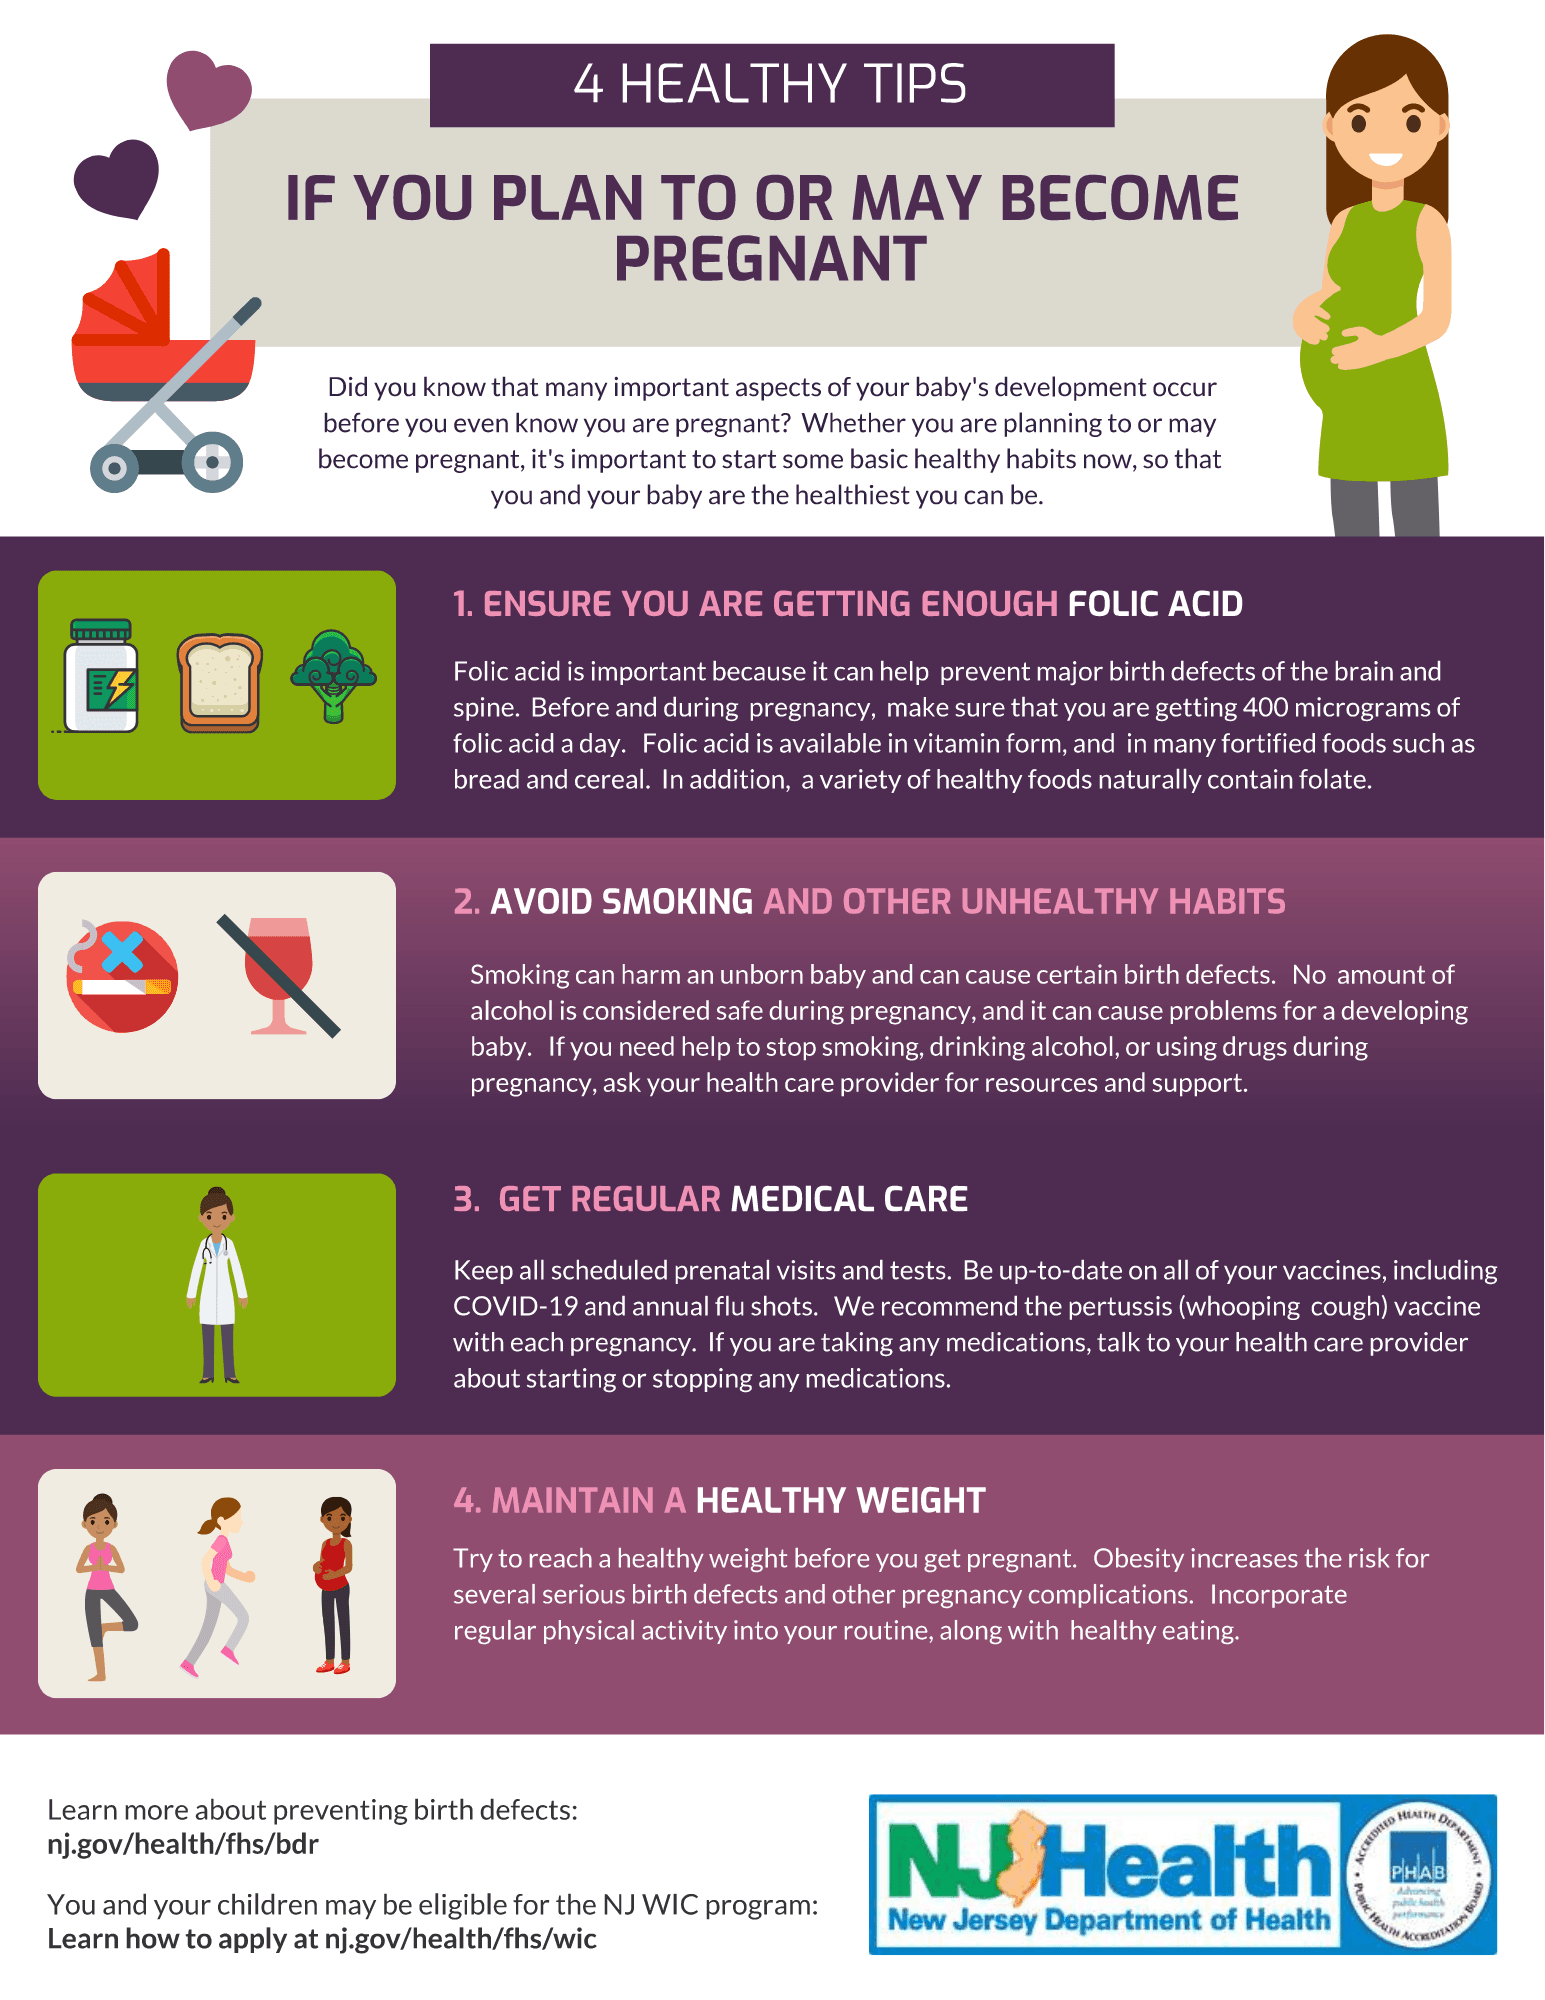 An infographic explaining all 4 tips for a healthy pregnancy as they appear in the blog post.